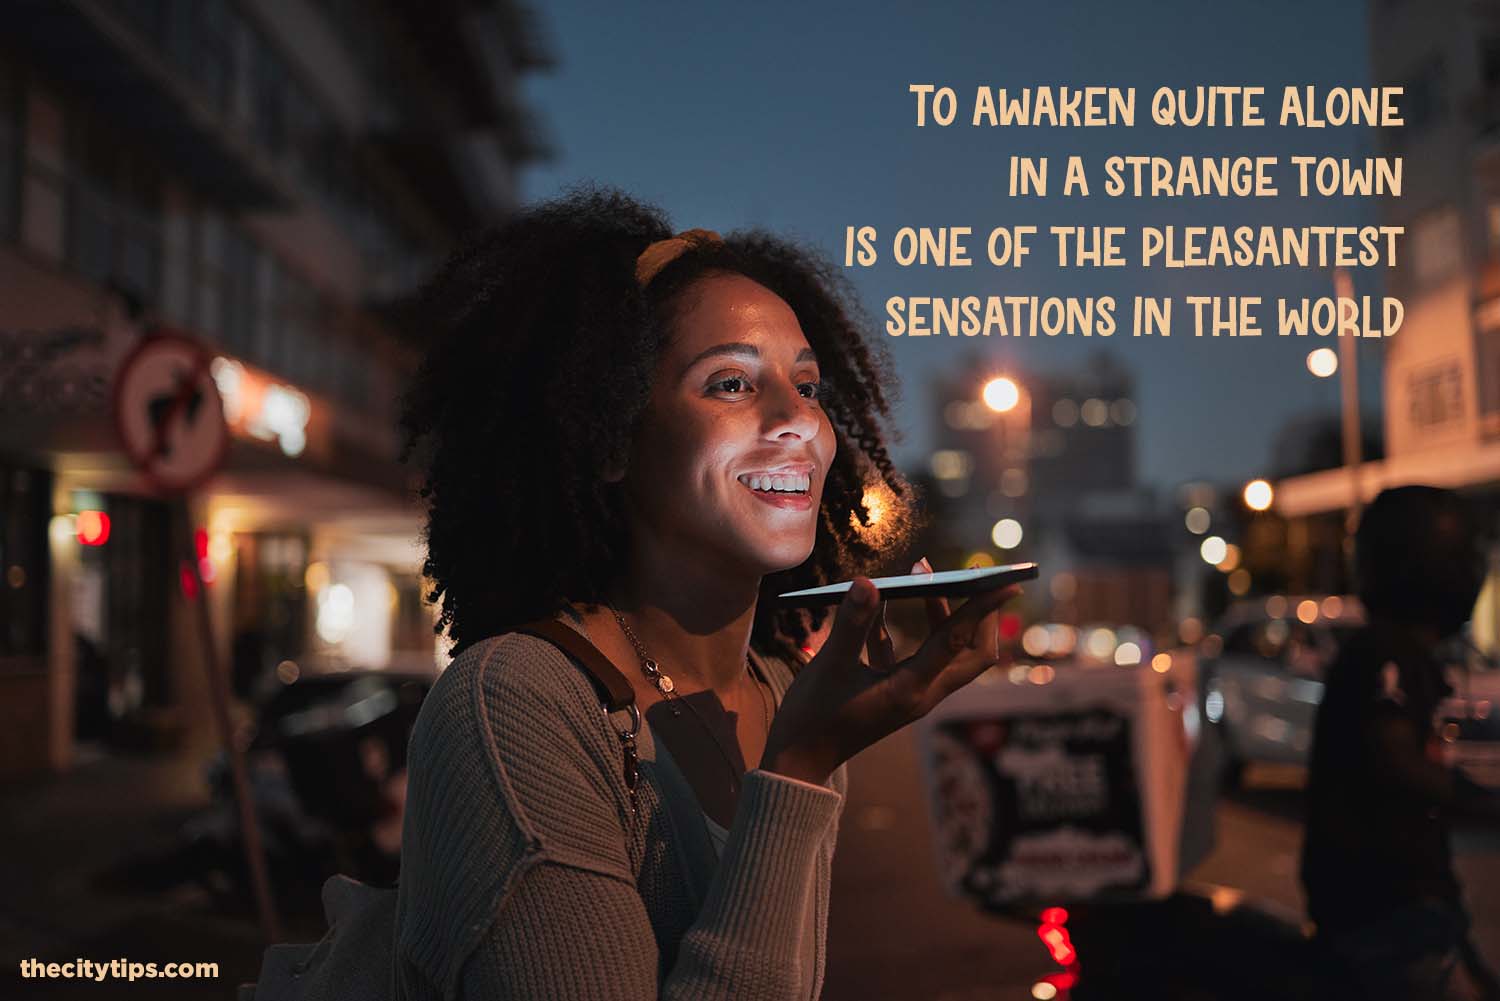 "To awaken quite alone in a strange town is one of the pleasantest sensations in the world." by Freya Stark